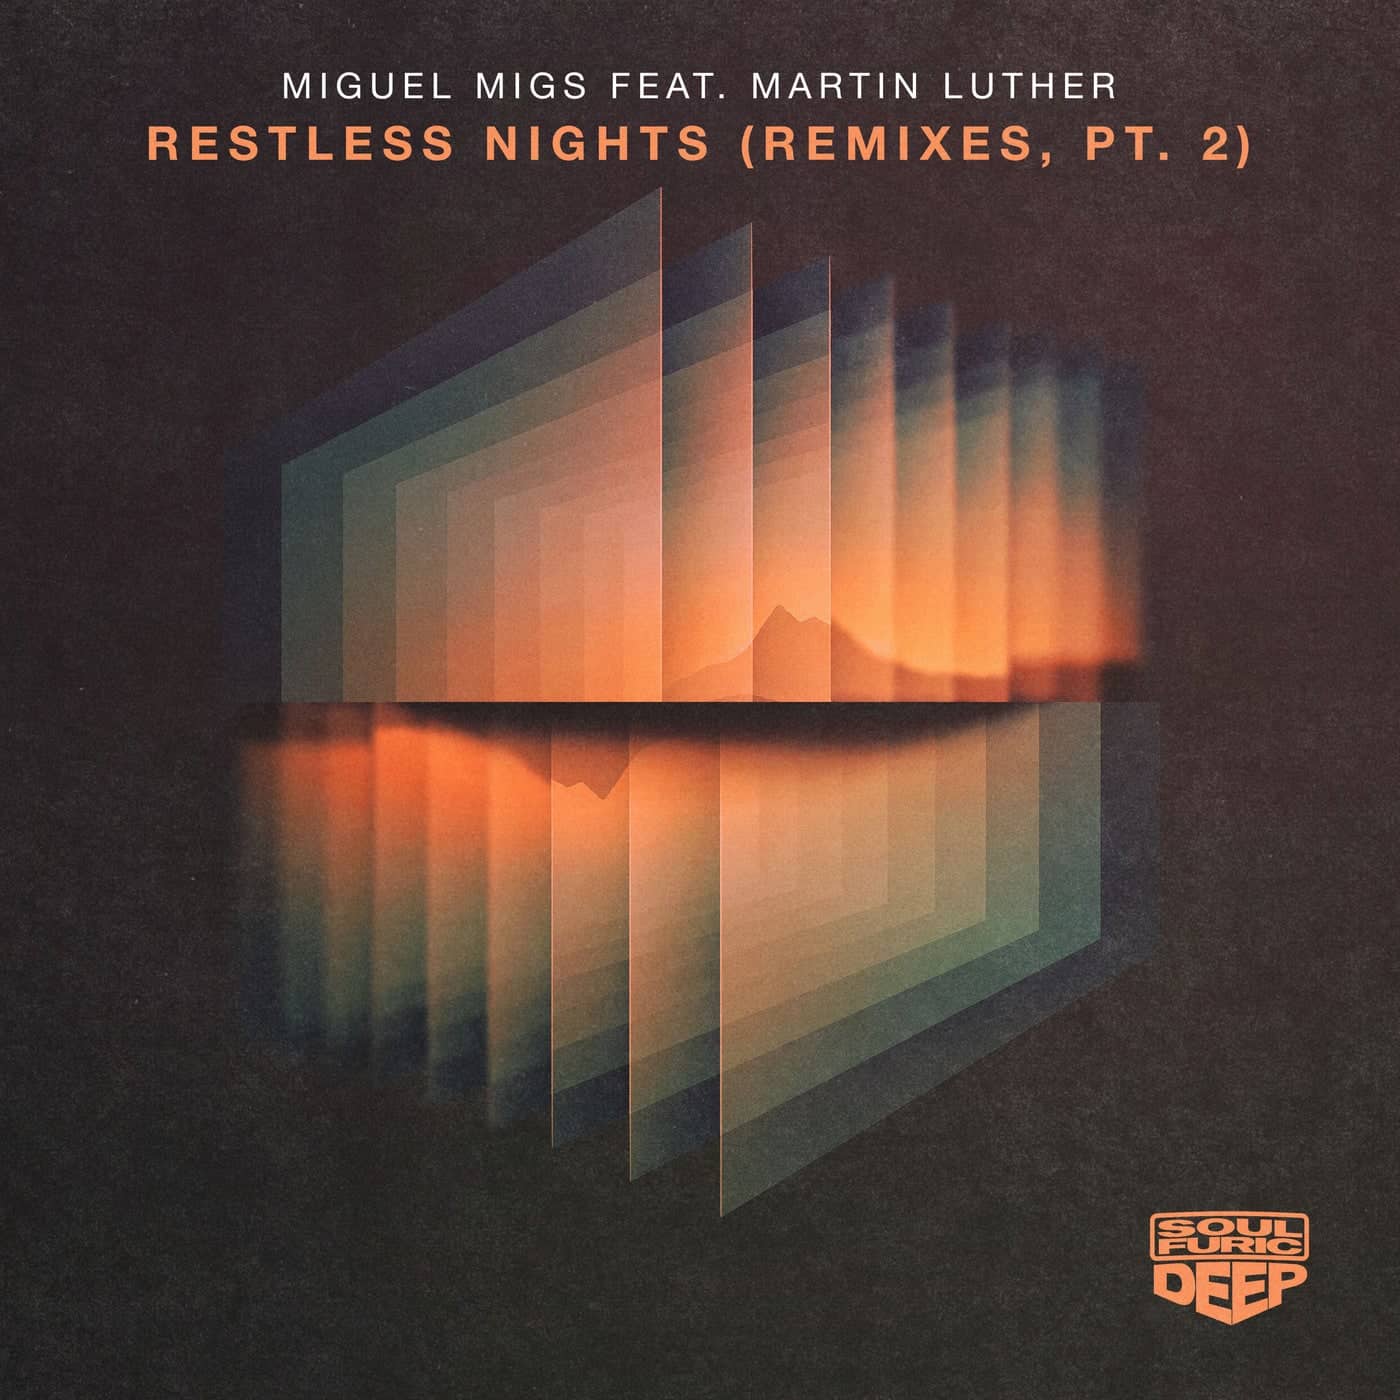 Download Miguel Migs, Martin Luther - Restless Nights - Remixes, Pt.2 on Electrobuzz